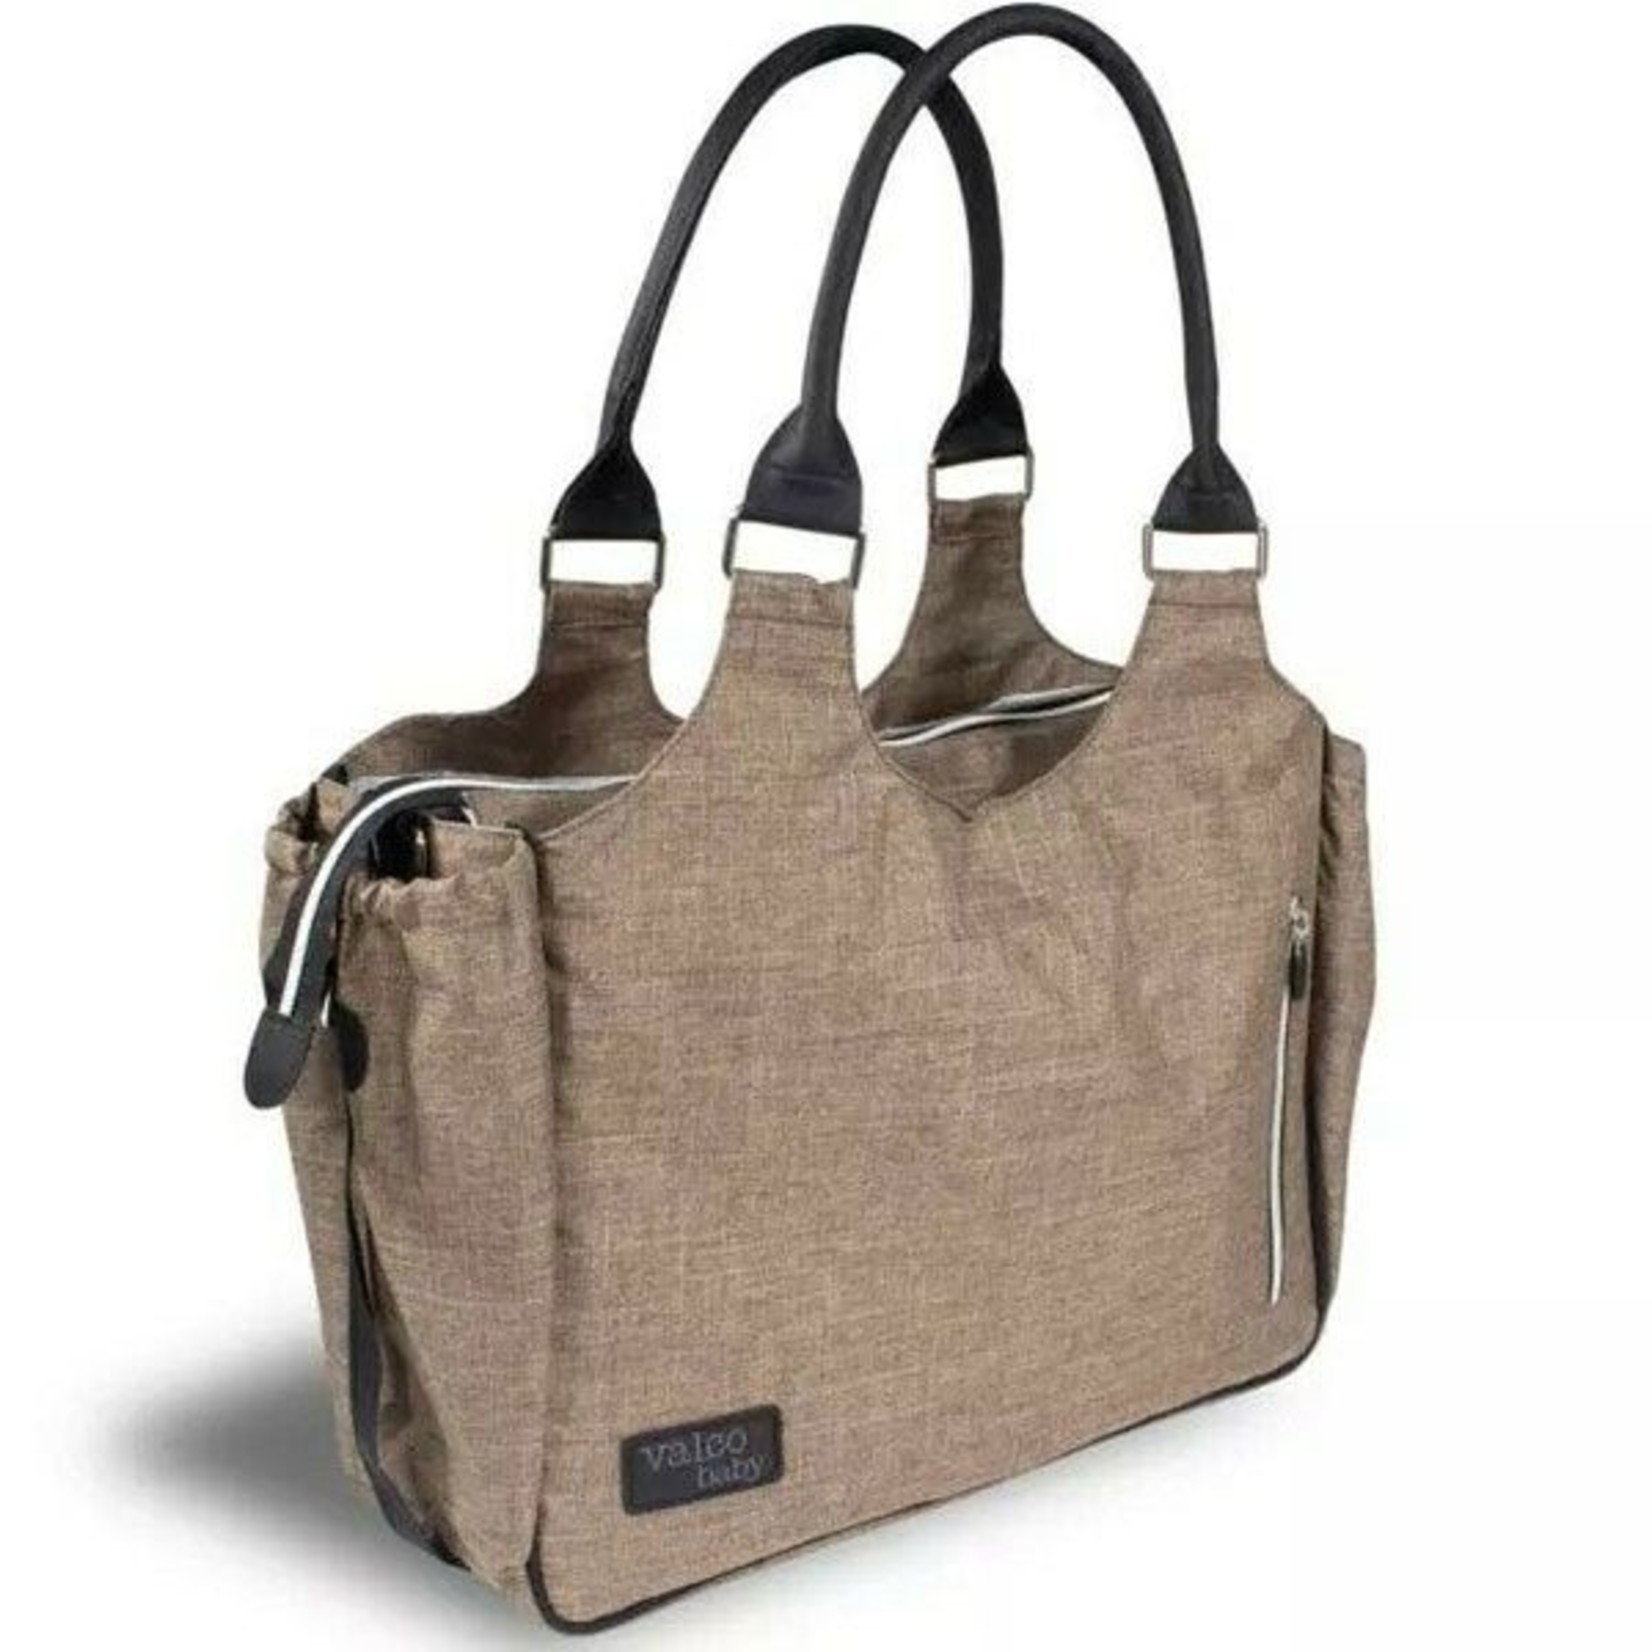 Valco Baby Mothers Bag-Cappuccino